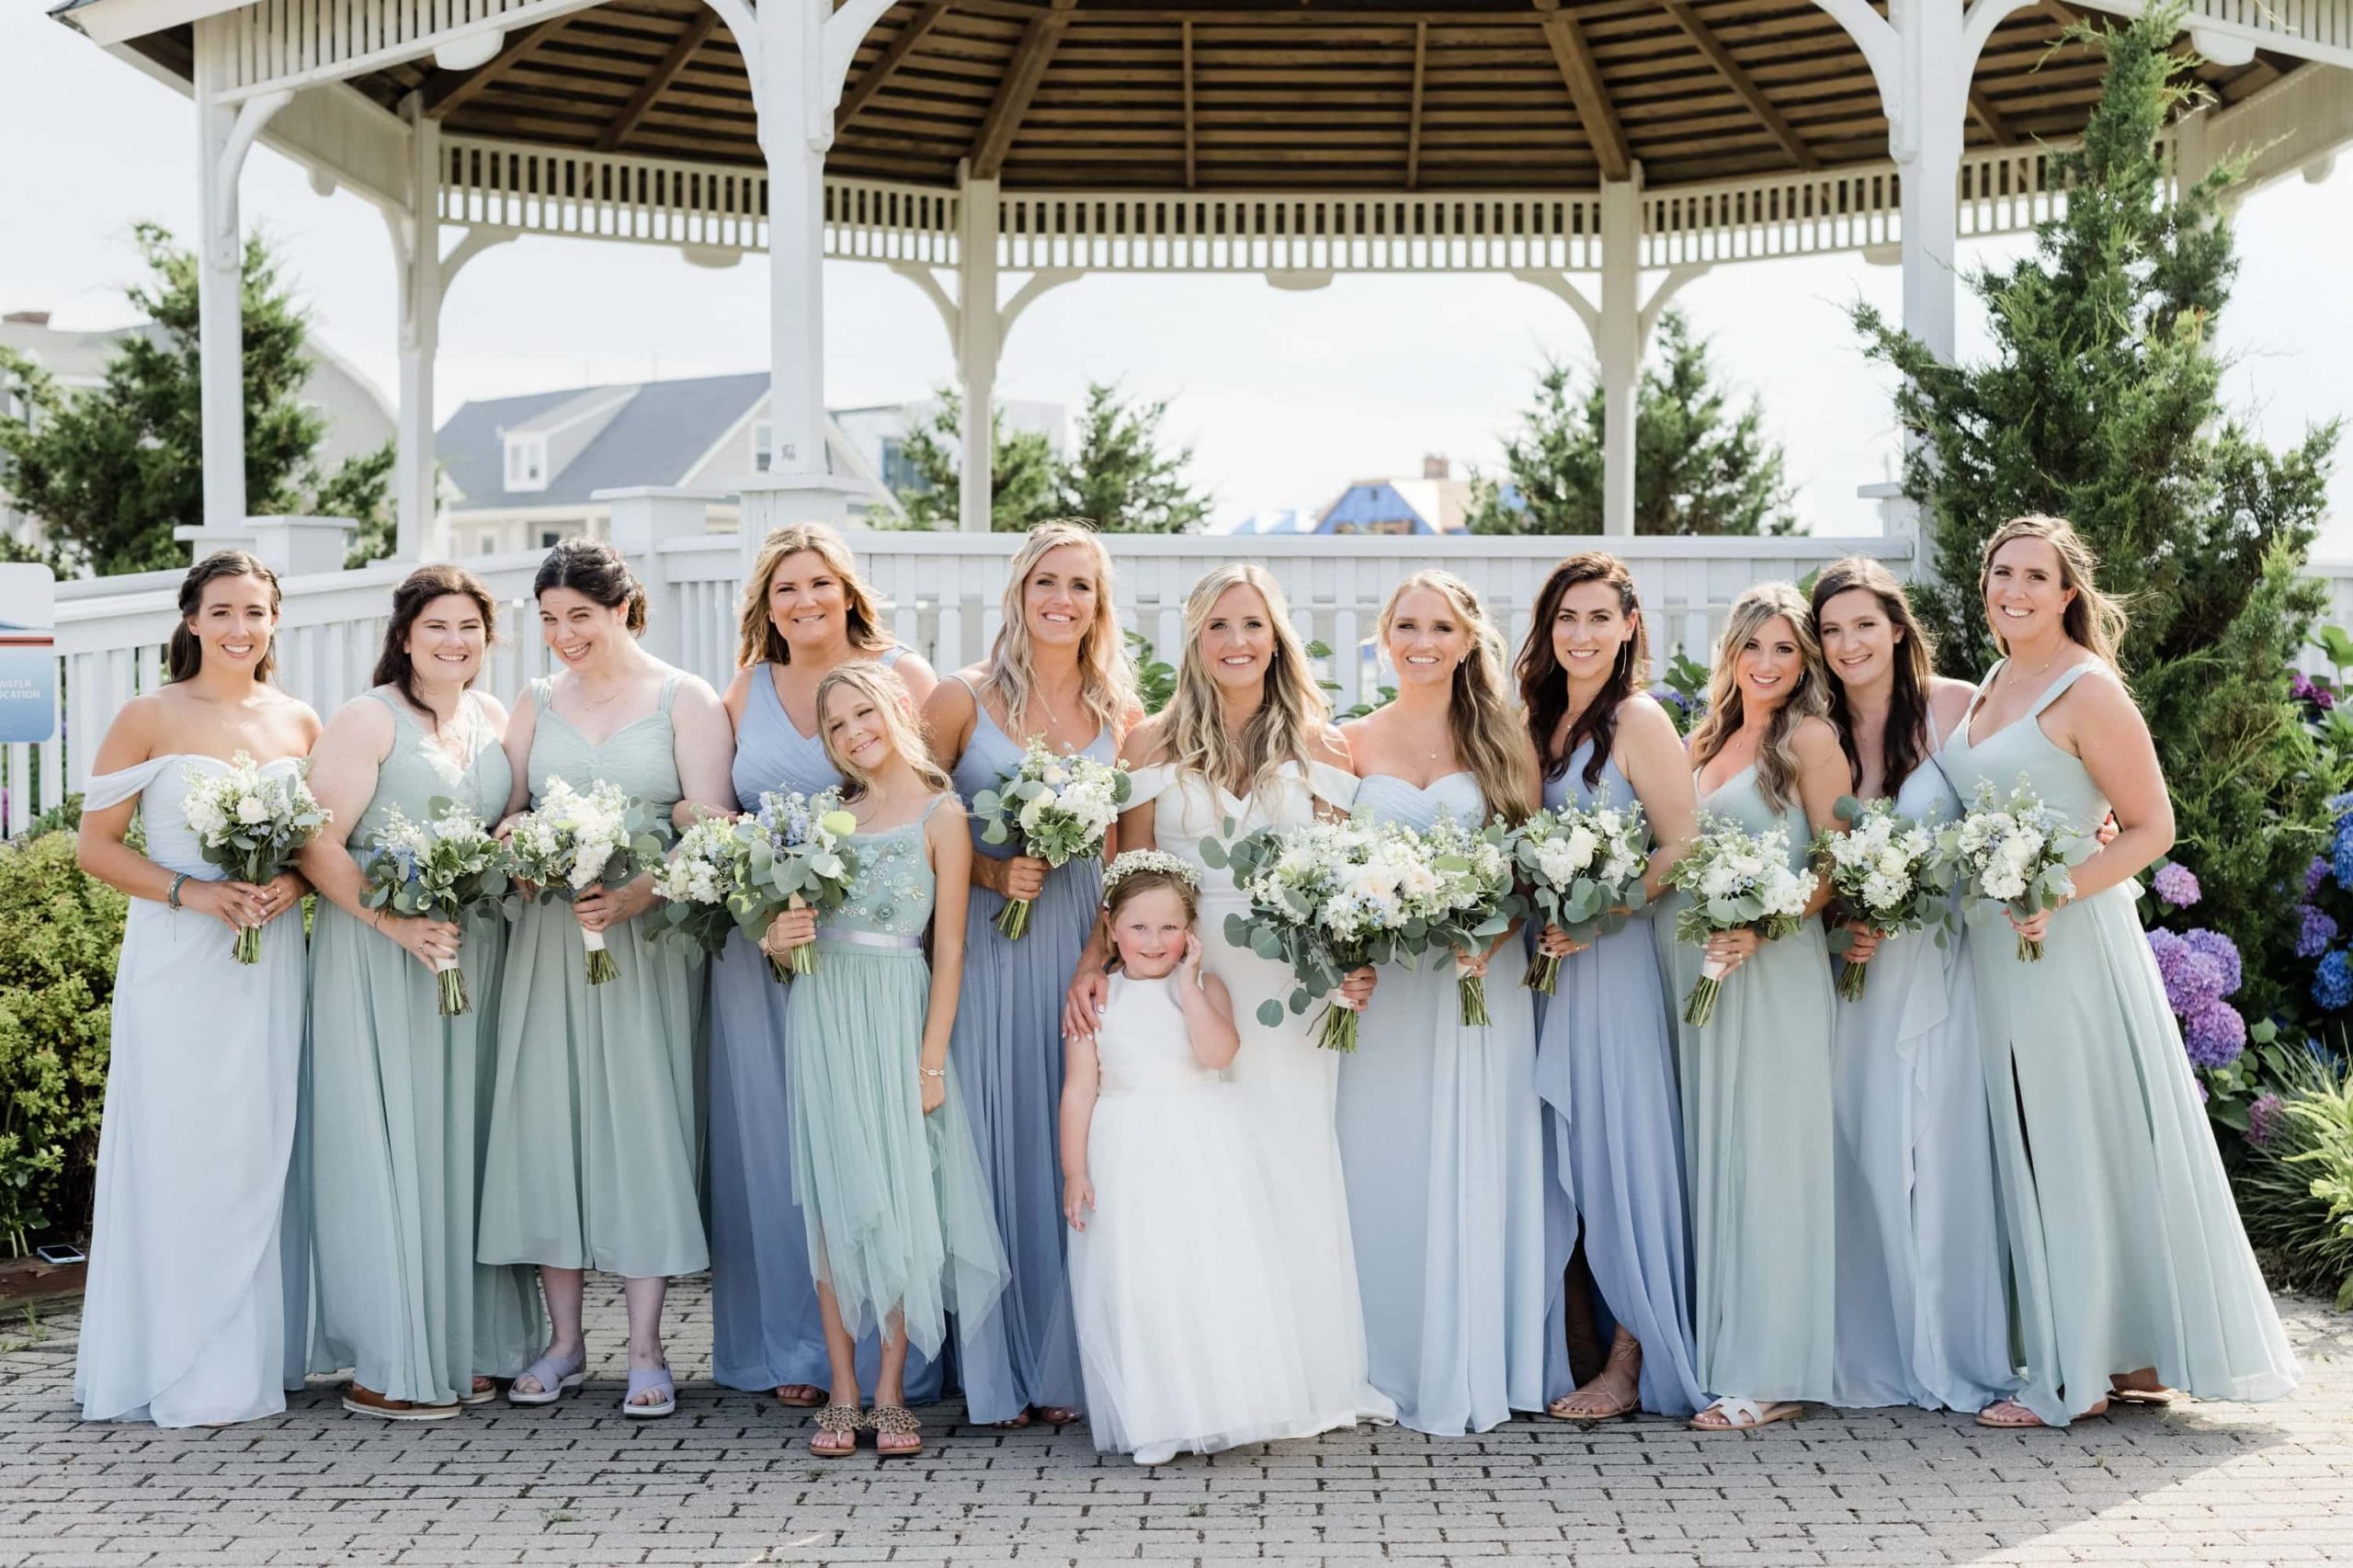 Bride with bridesmaids in light teal, green and blue dresses by the gazebo in Belmar NJ